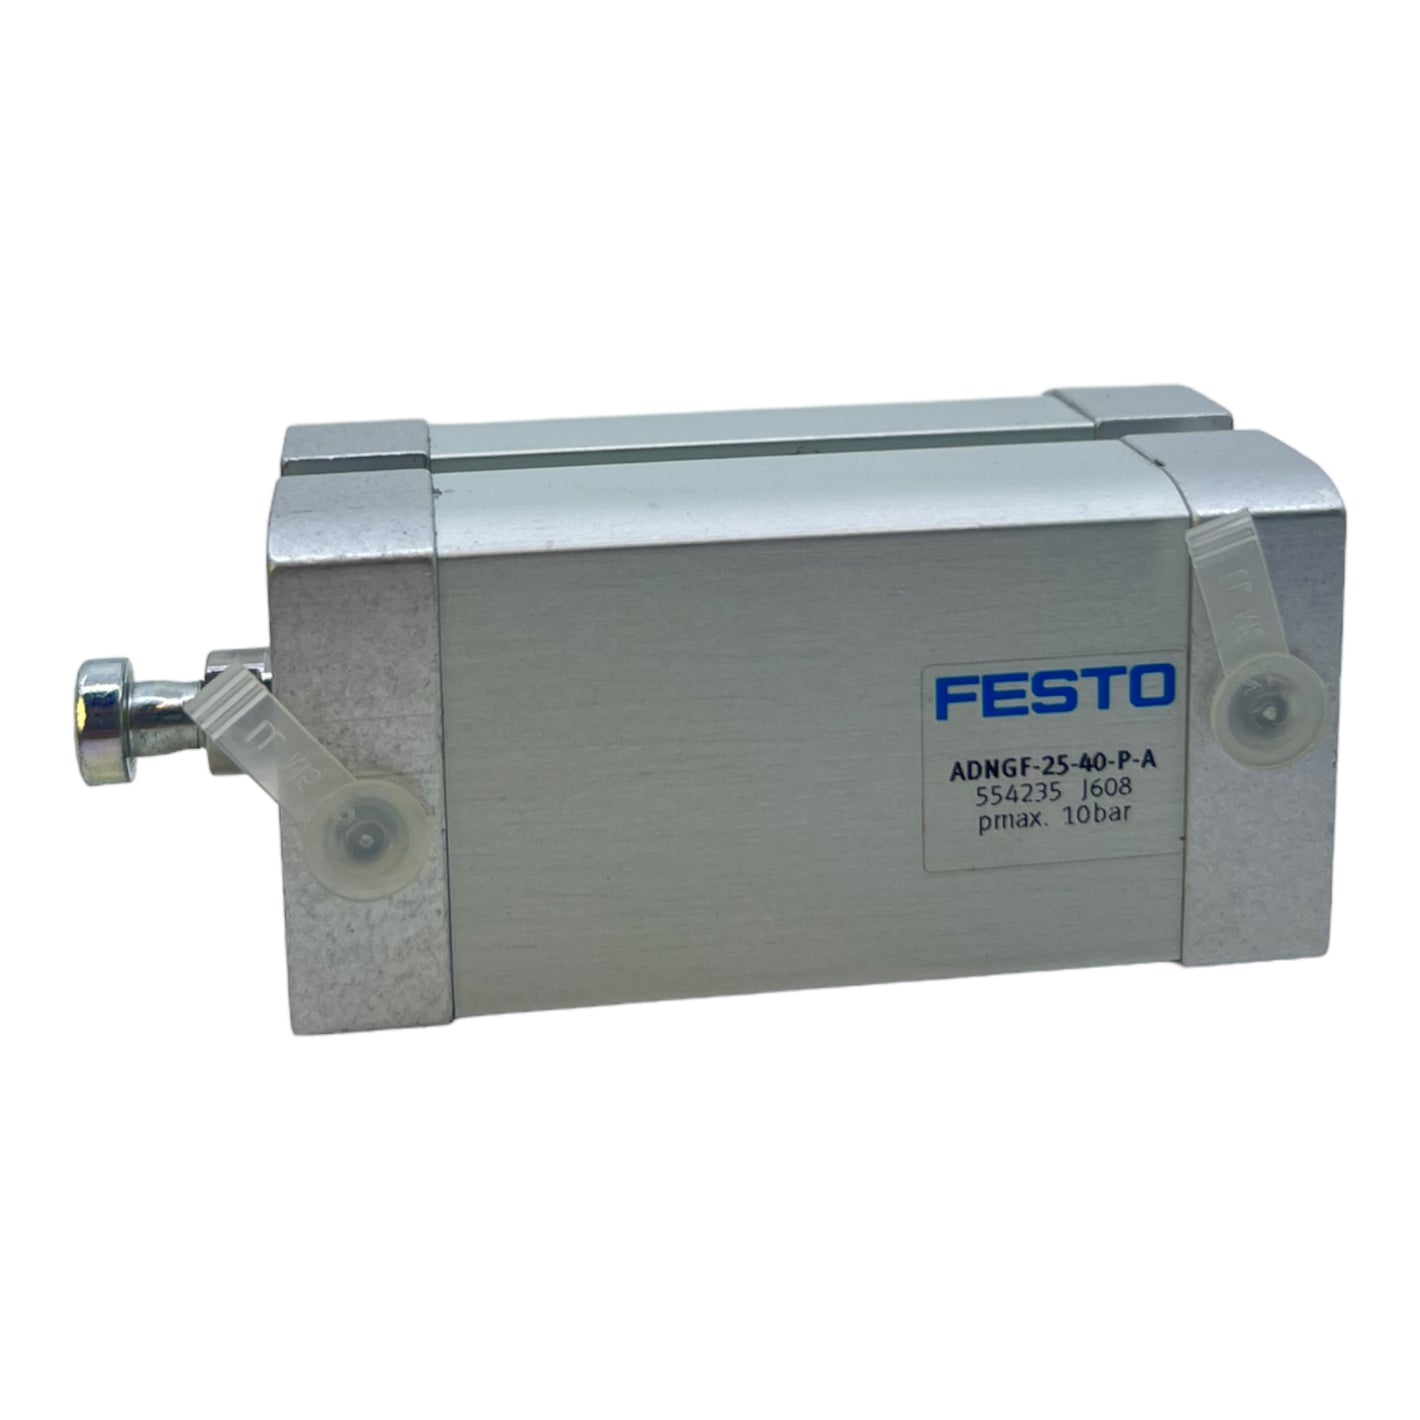 Festo ADNGF-25-40-PA compact cylinder 554235 for proximity switch pmax:10bar 